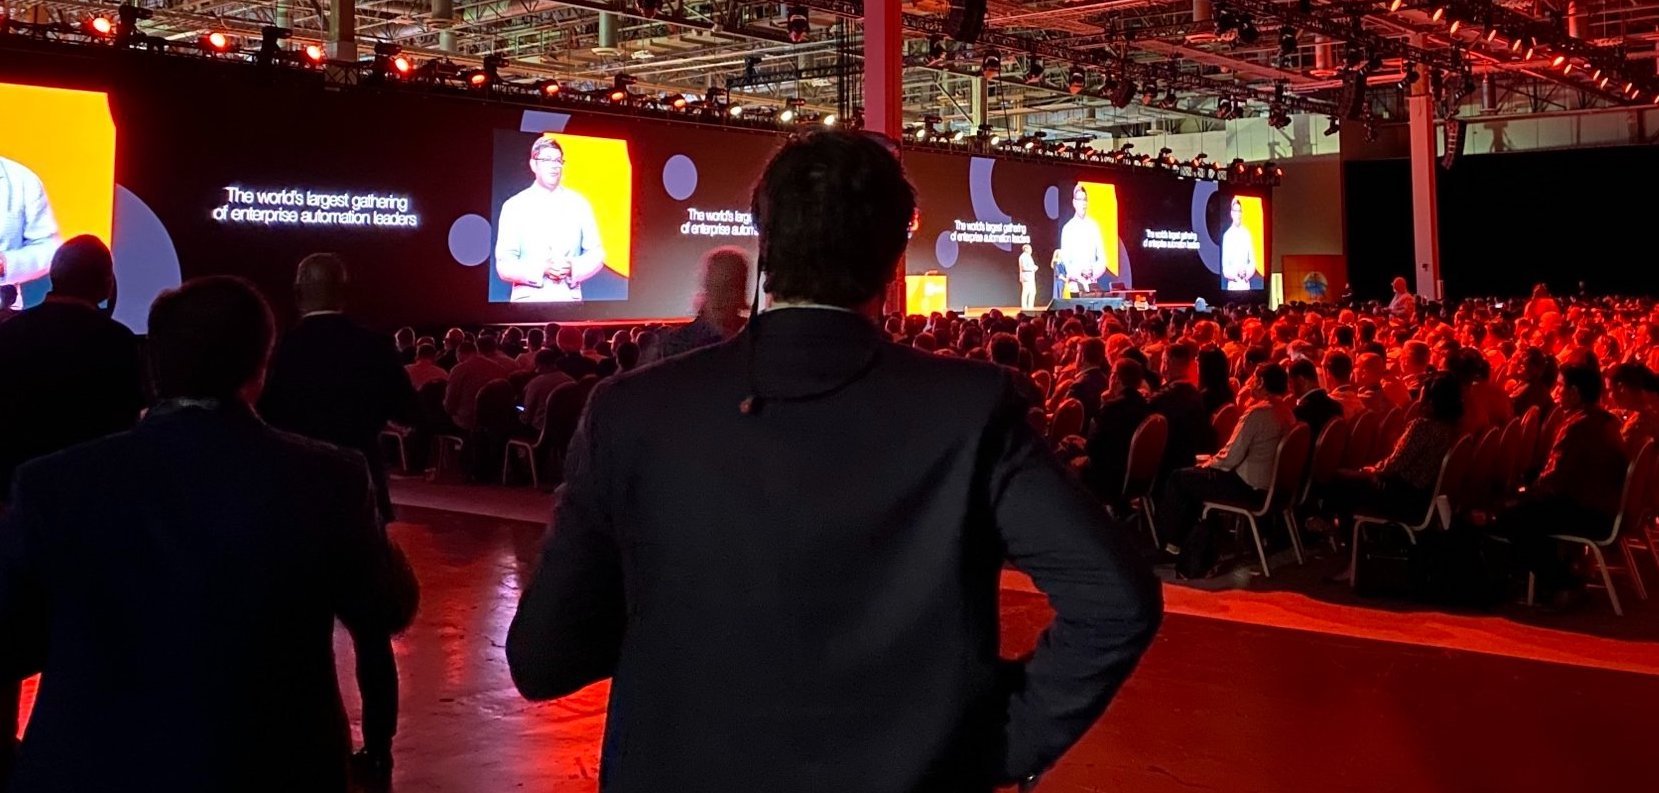 UiPath FORWARD 5 automation conference 2022 keynote audience